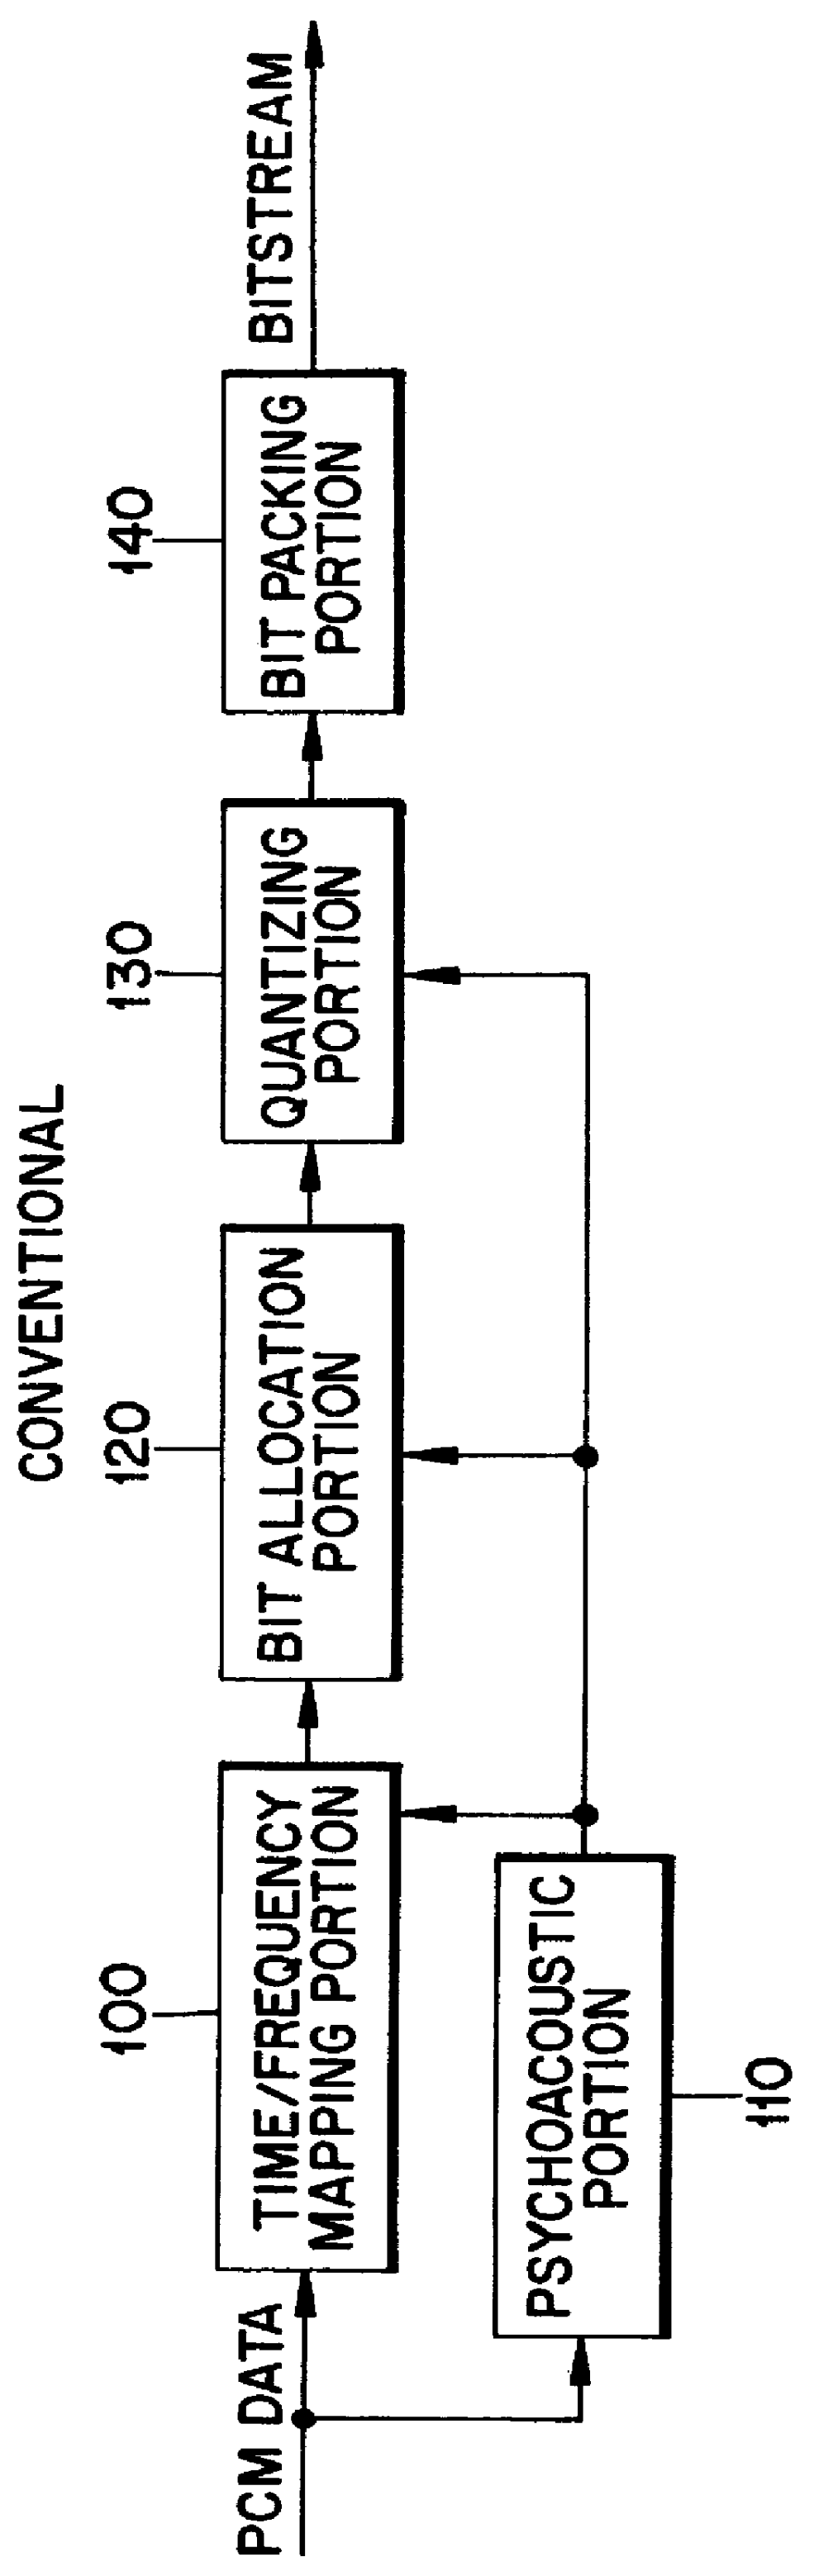 Scalable audio coding/decoding method and apparatus